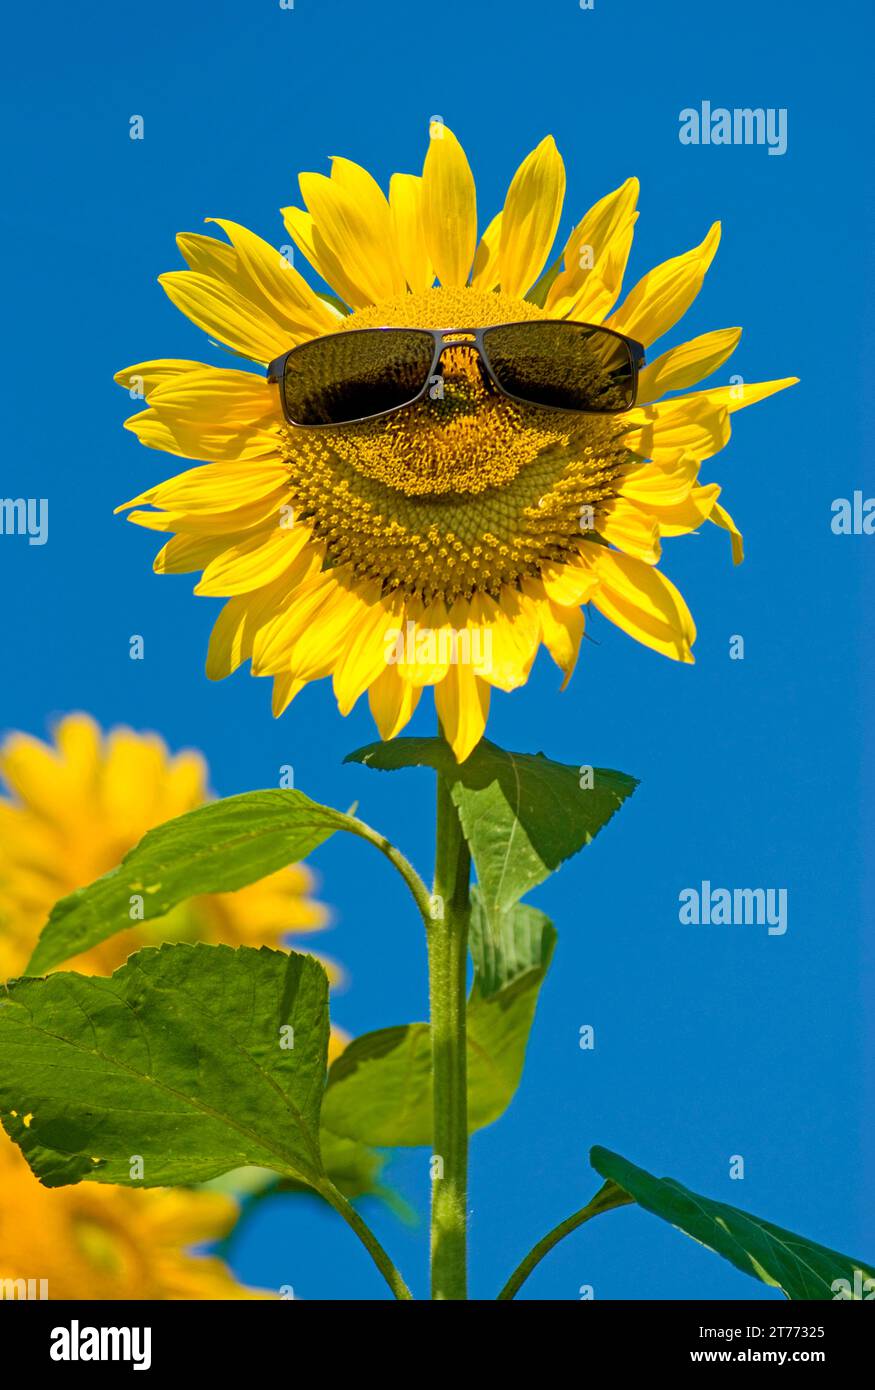 sunflower (Helianthus Anuus) with sun glasses smiling in Bavaria, Germany Stock Photo